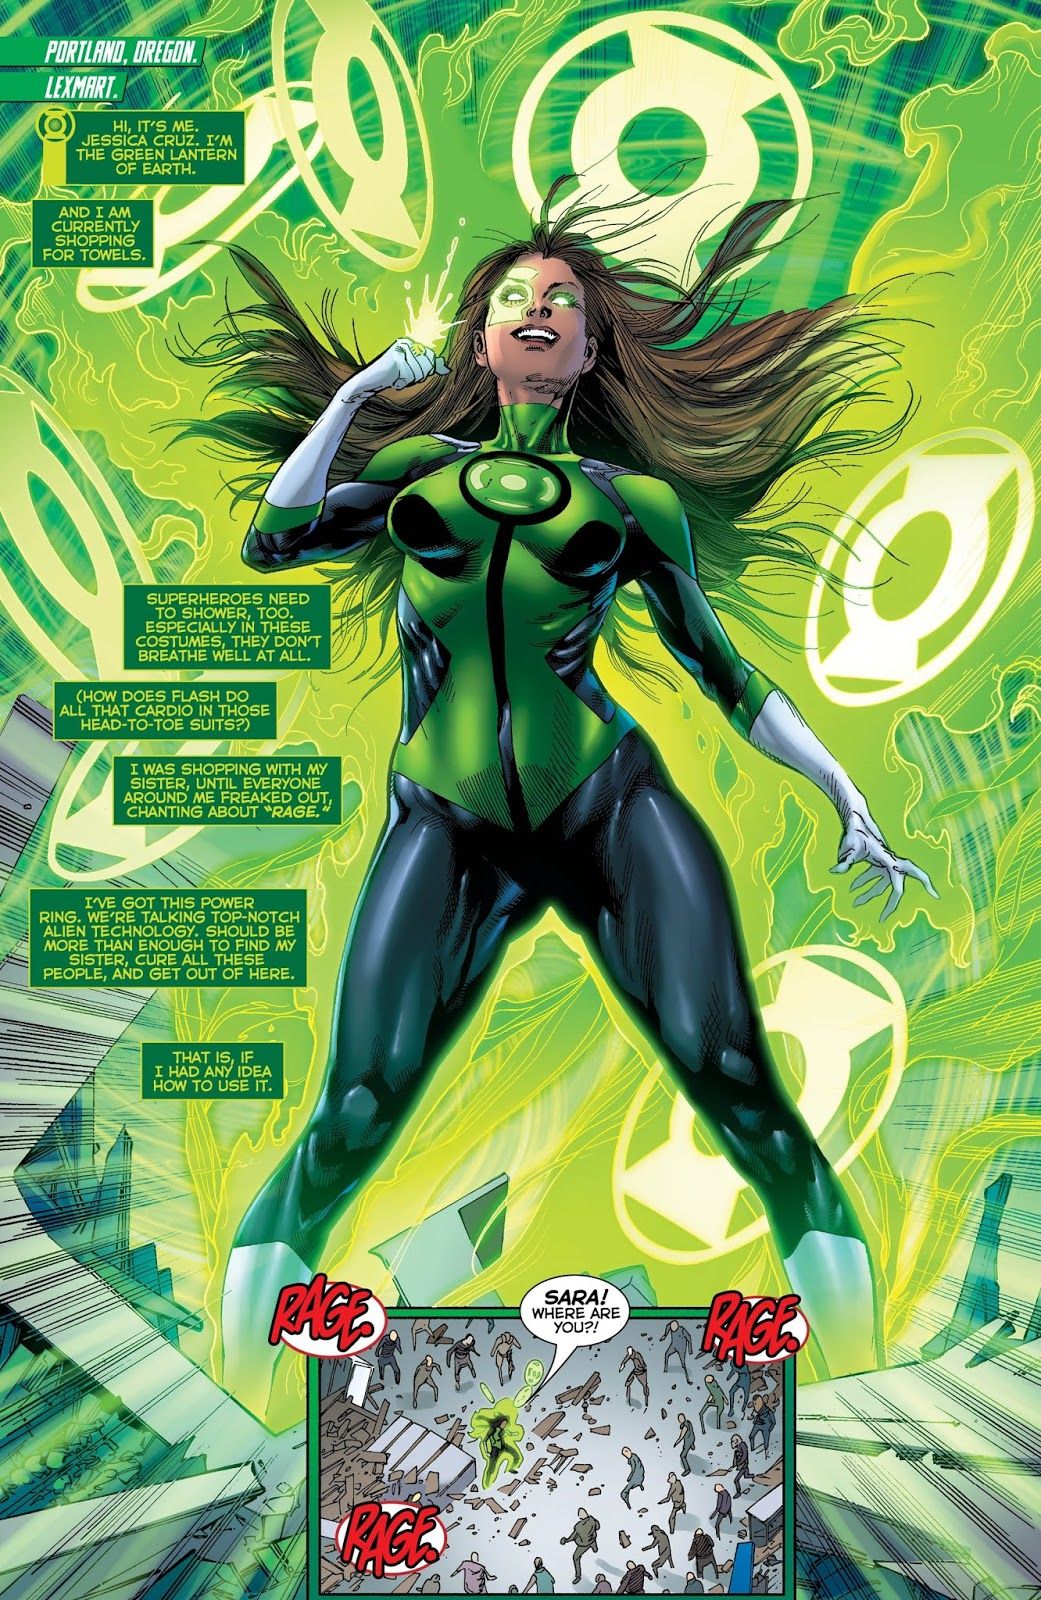 Weird Science DC Comics: Green Lanterns Review and *SPOILERS*